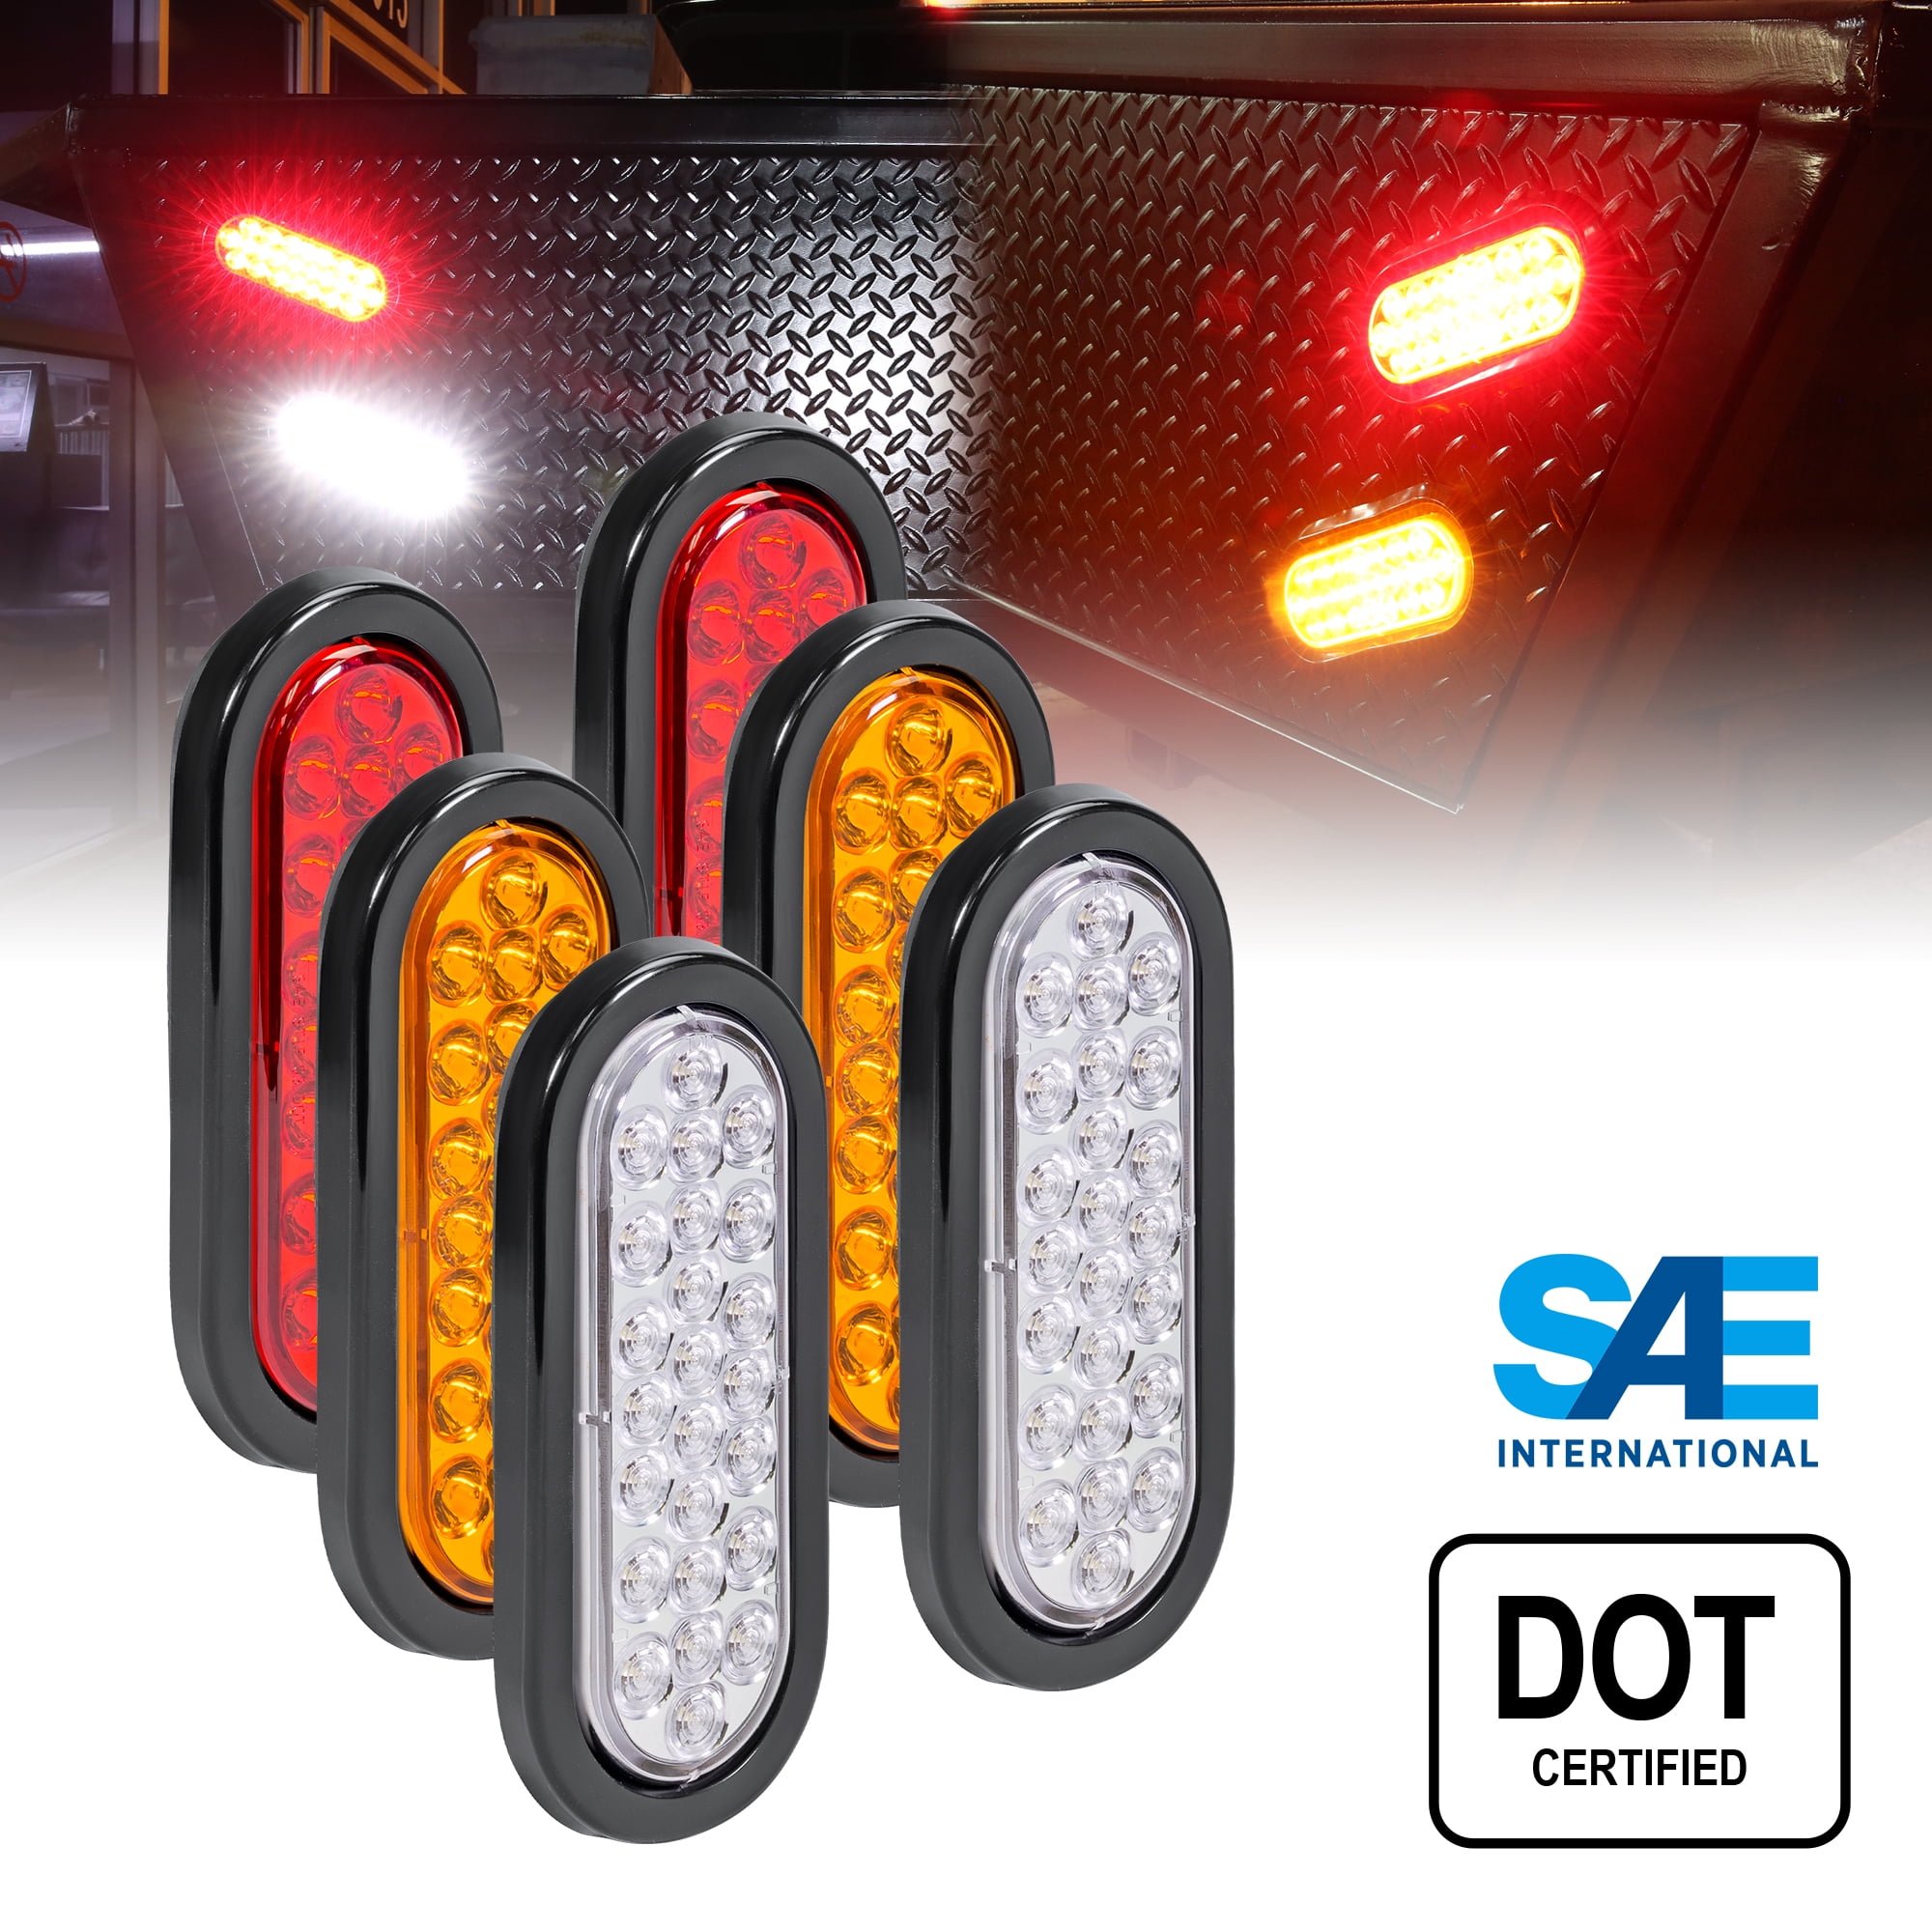 LIGHTS COMPLETE KIT WITH STD Trailer 6" OVAL Steel Box Tail Light Guard Kit